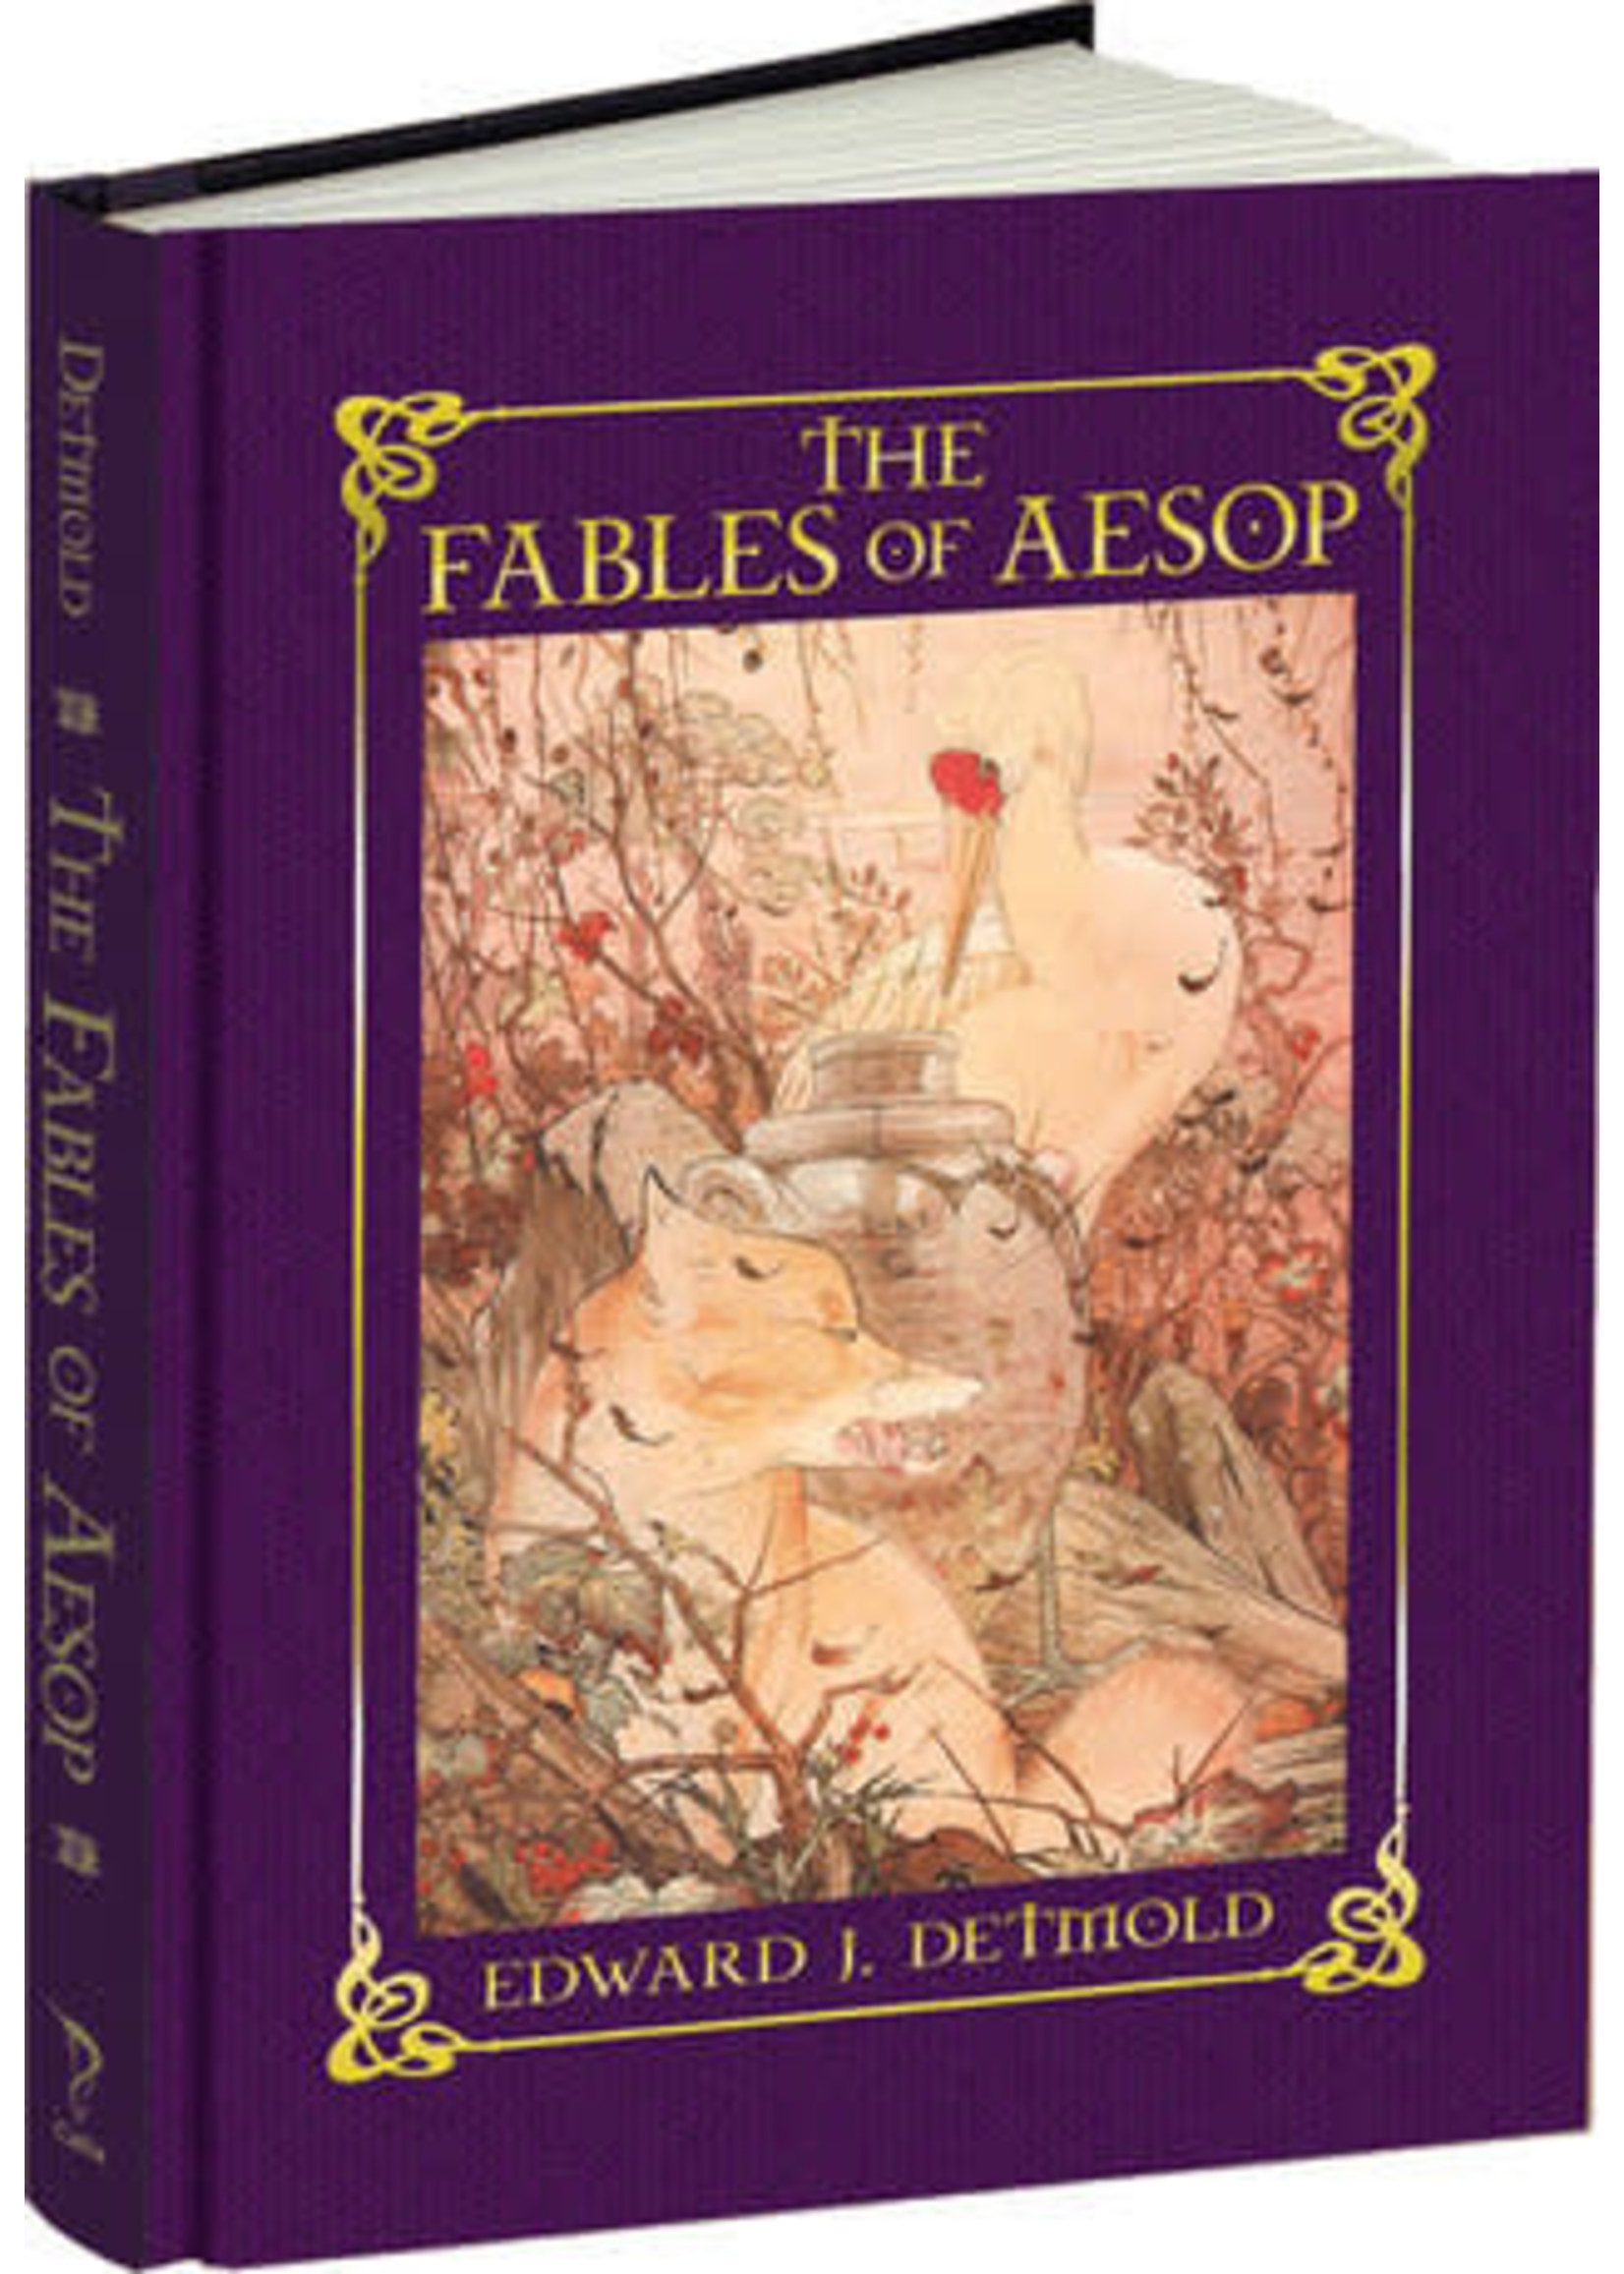 The Fables of Aesop by Edward Julius Detmold